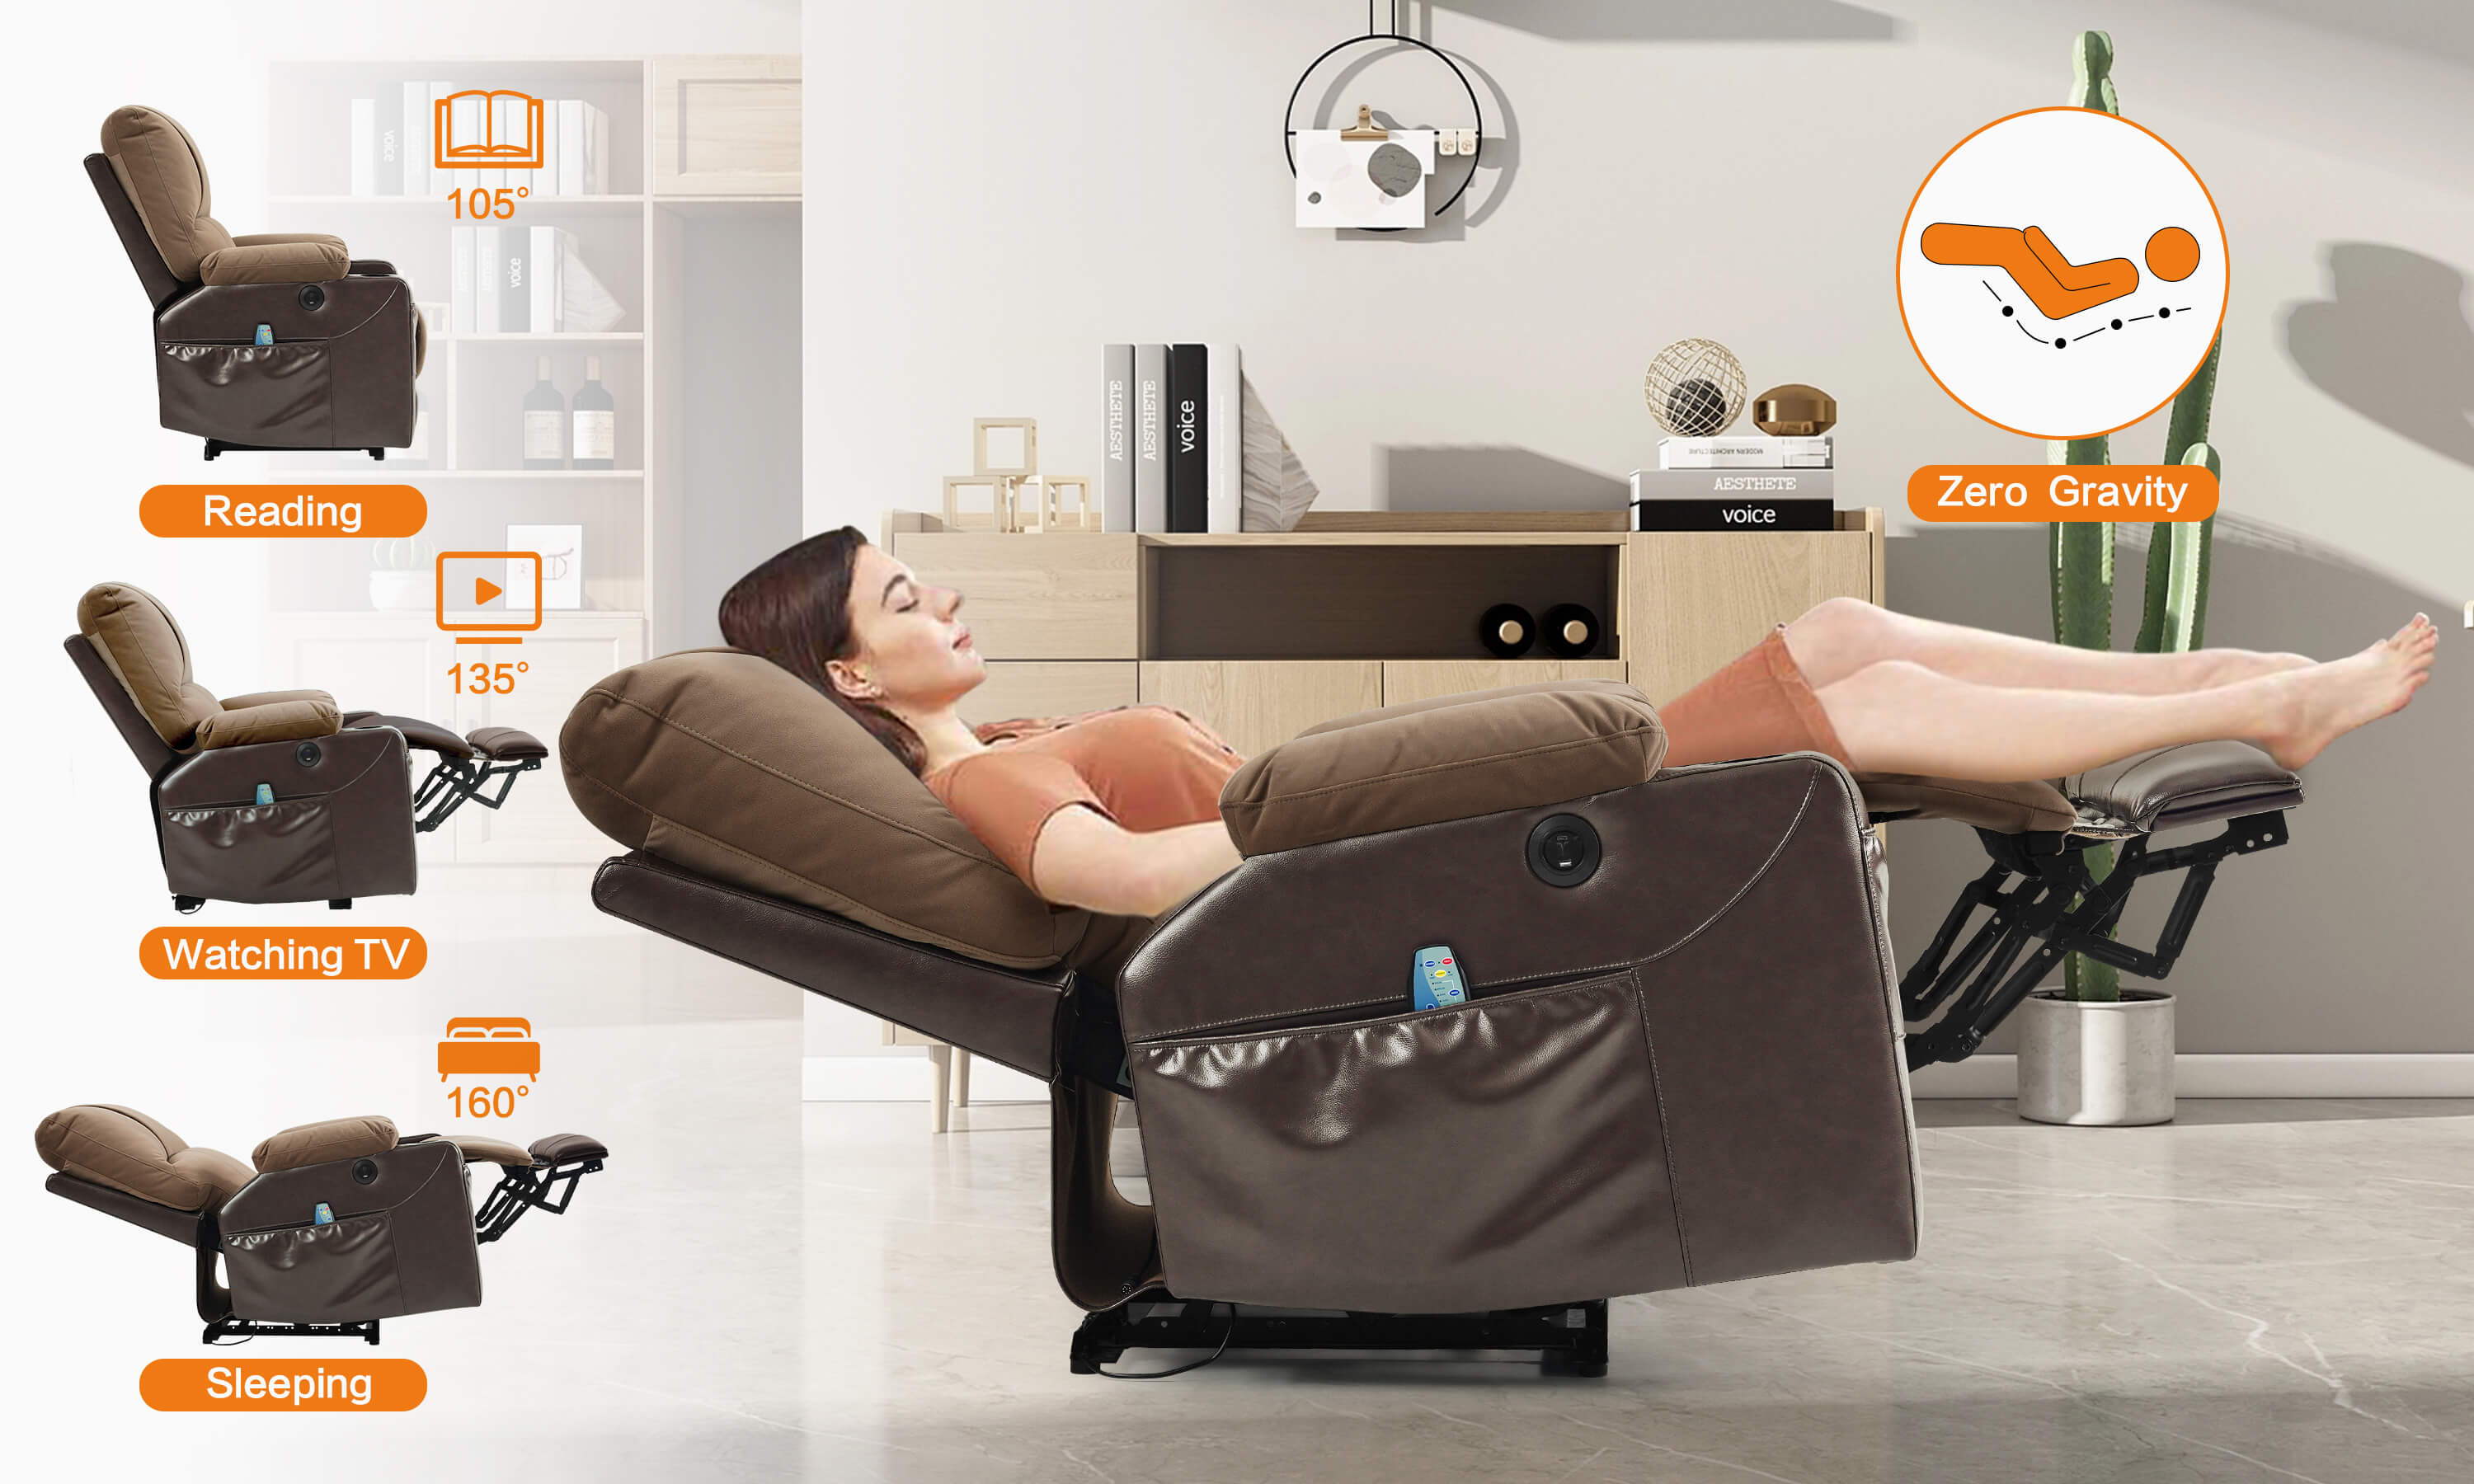 ASJMREYE Power Recliner Chair,Zero Gravity Chair With Vibration Massage and Heating,33.85